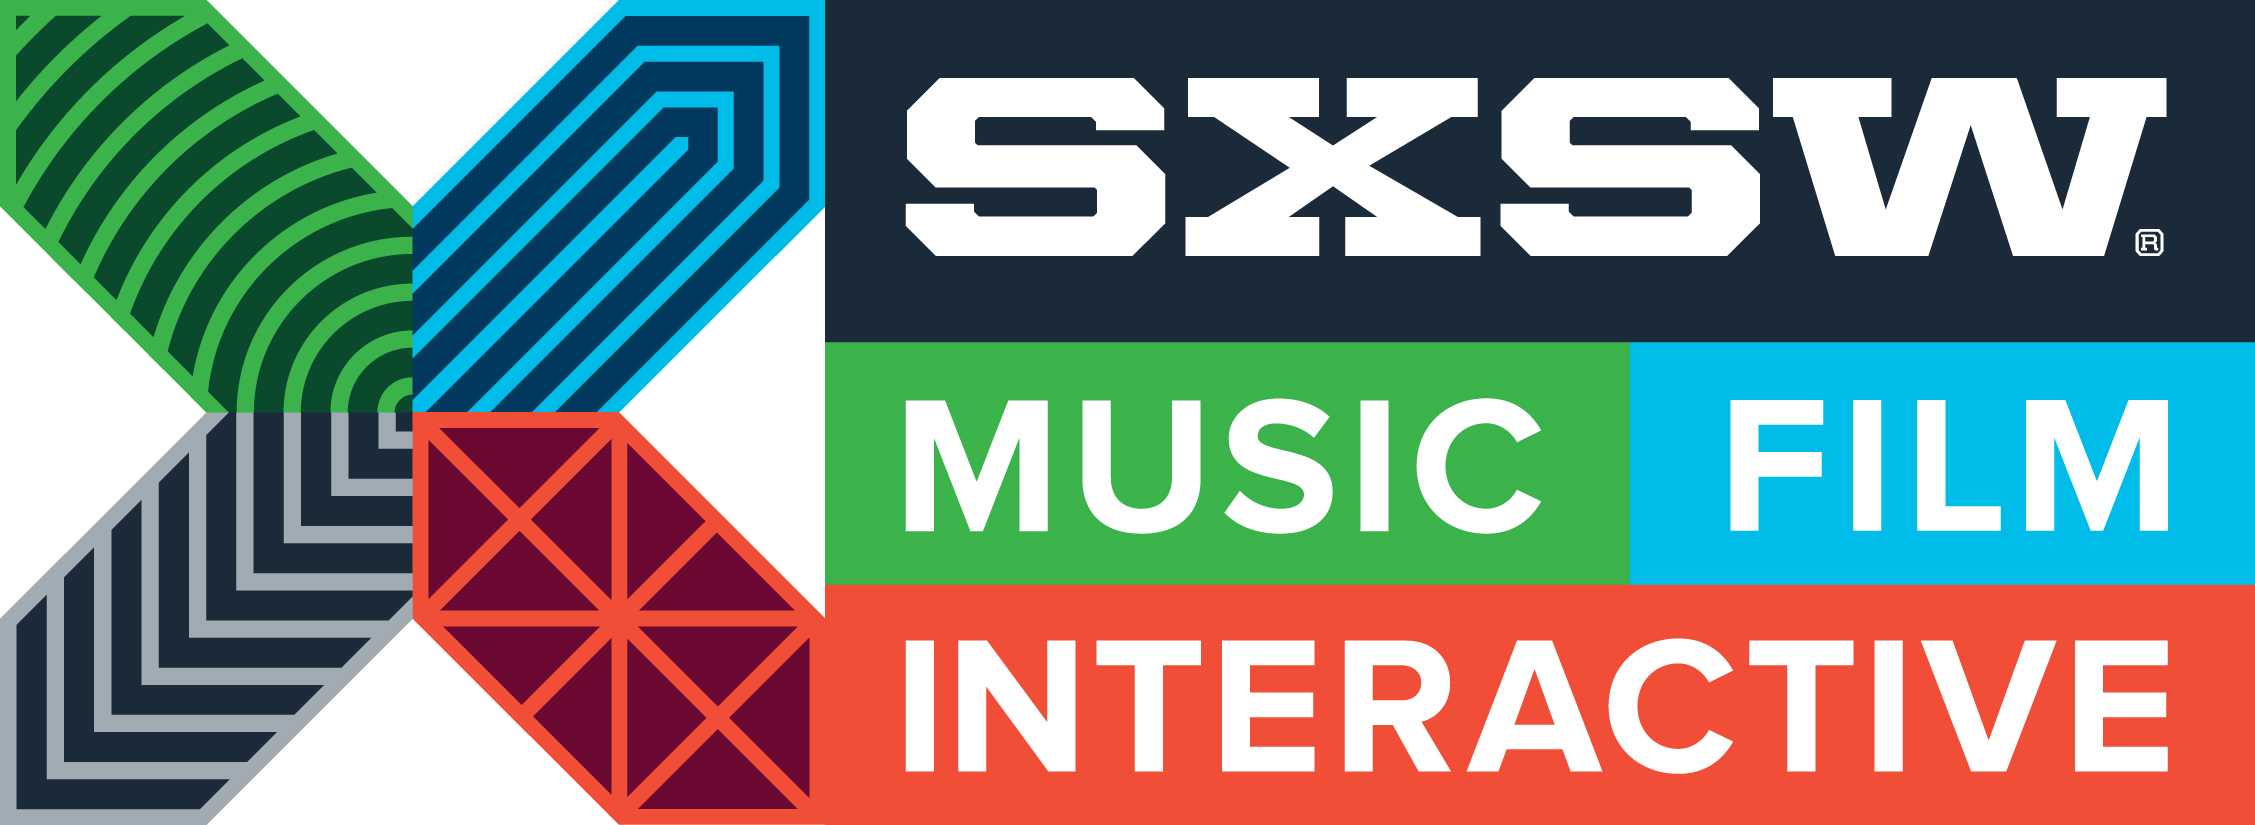 Poster for the South By Southwest (SXSW) Music Film Interactive. Flavorlab Sound provided audio post f two films in the festival in 